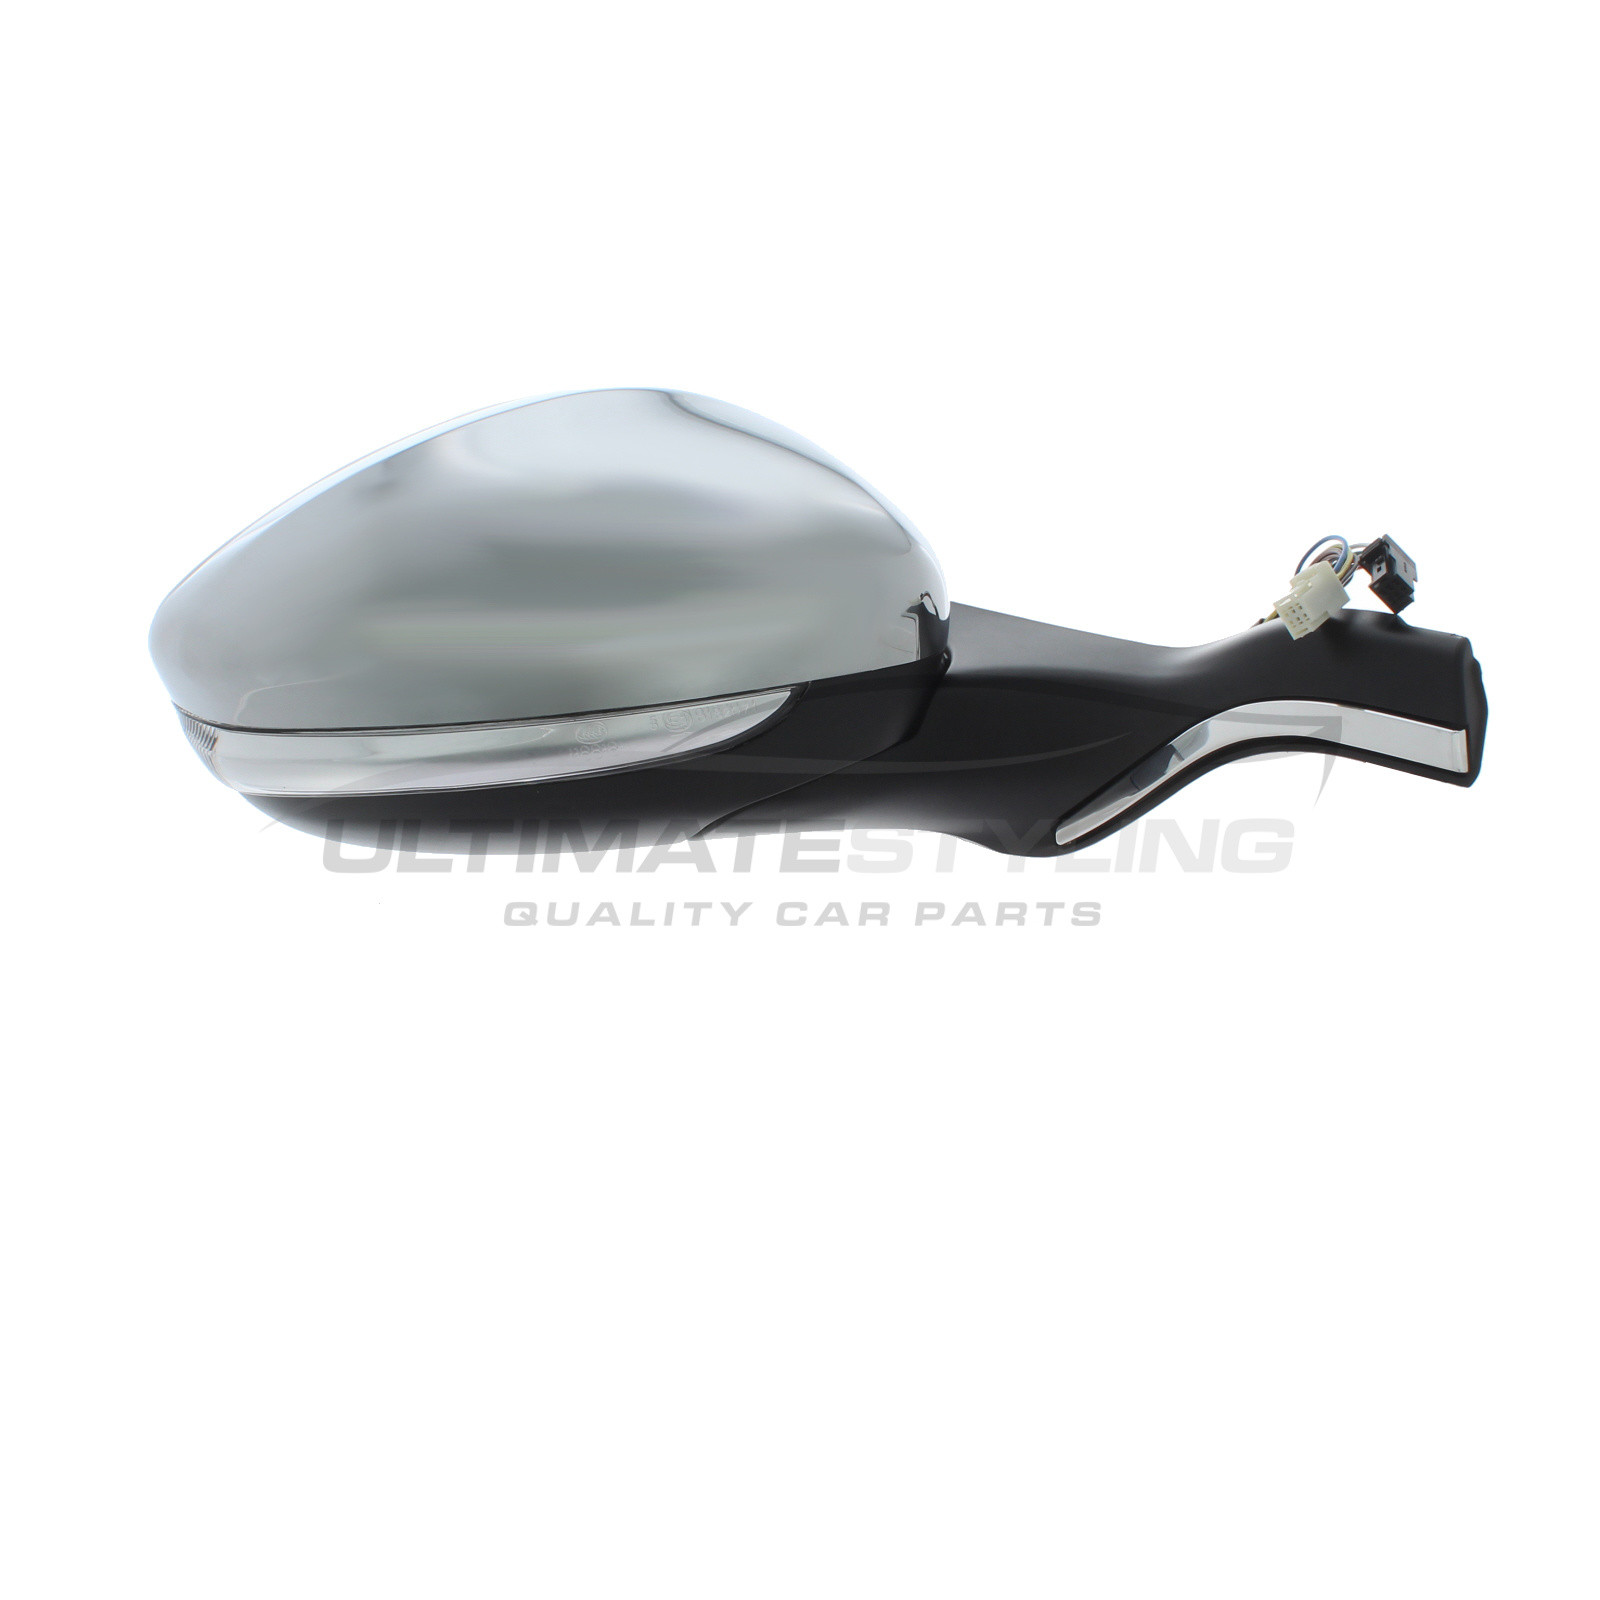 Peugeot 208 2012 - 2019 Wing Mirror Cover RH or LH Side In Gris Shark